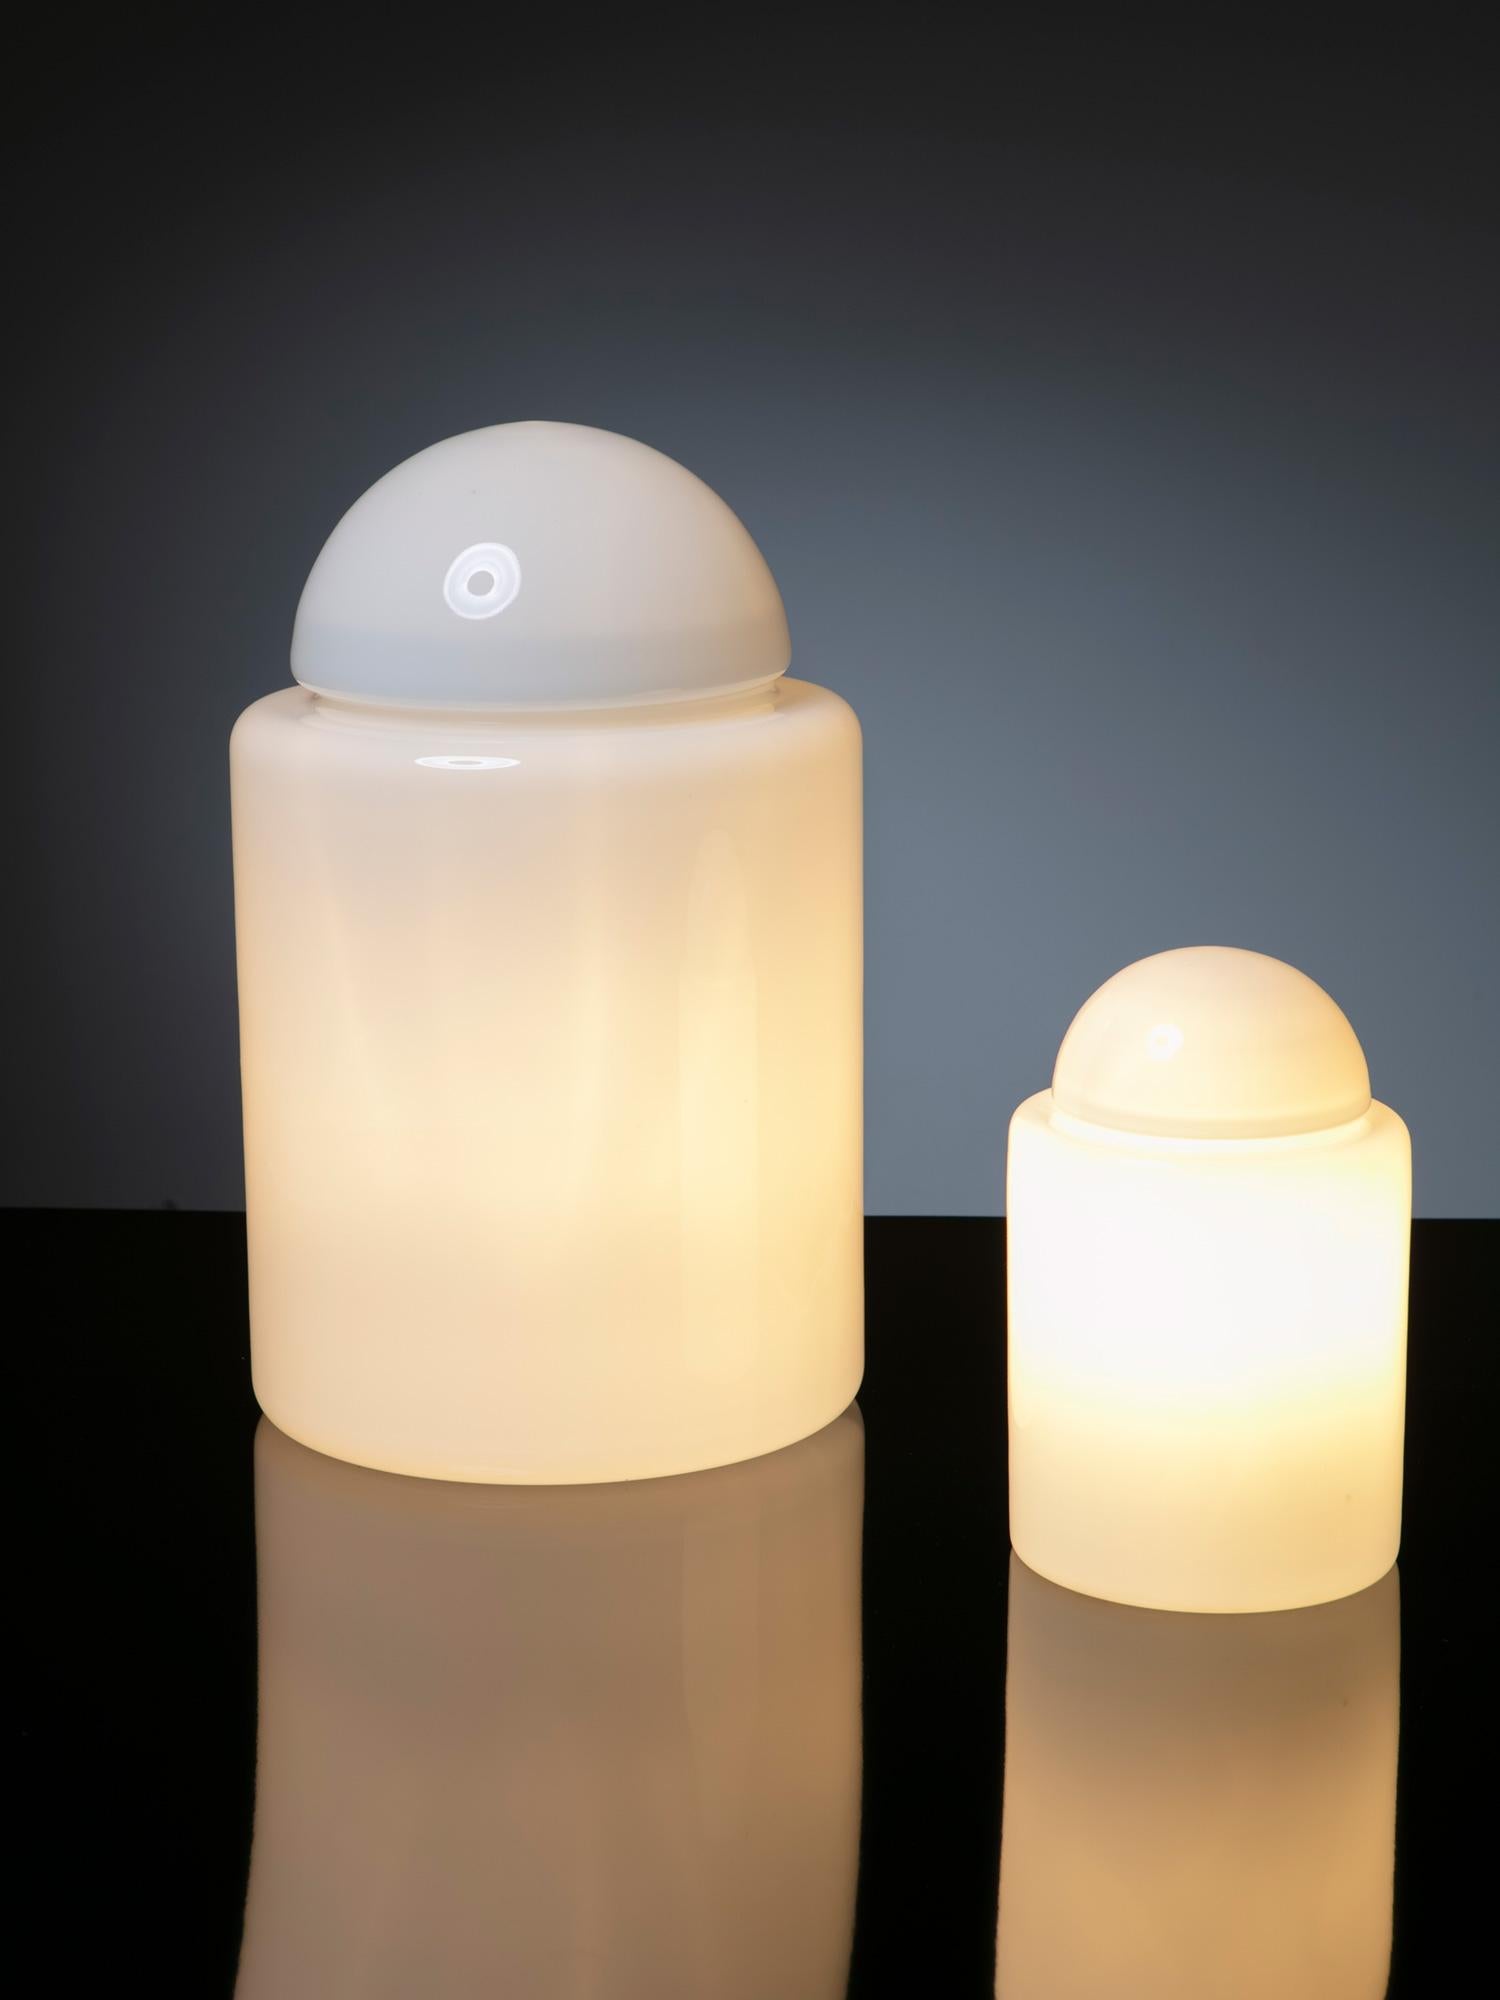 Rare set of two Barattolo table lampsby Sergio Asti for Candle.
This project follows the steps of the Daruma lamp, with two overlapping milk glass elements creating a familiar lighting object.
Size refers to the biggest piece.